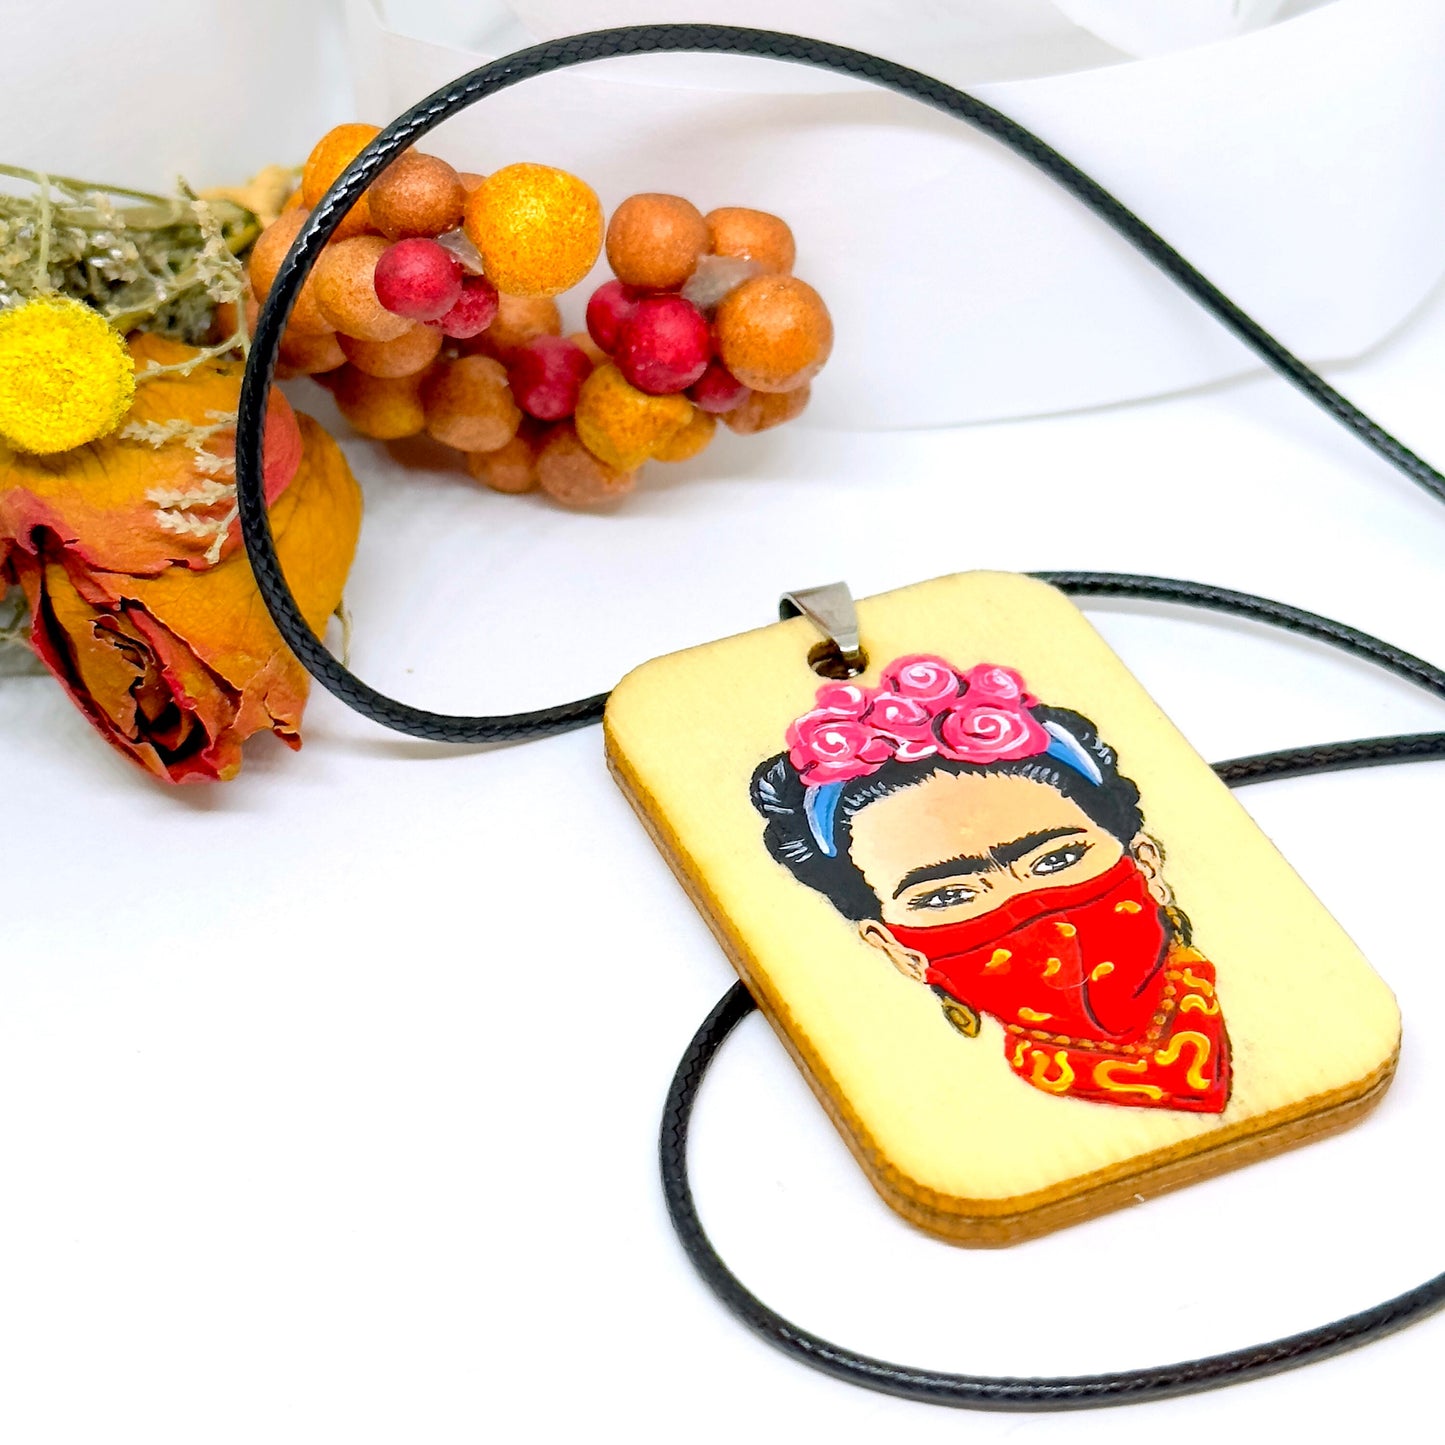 Rebel Frida Inspired Handpainted Wooden Pendant Necklace Fridalovers Art To Wear Fashion Feminist Mexican Artist Portrait Bohemian Accessory